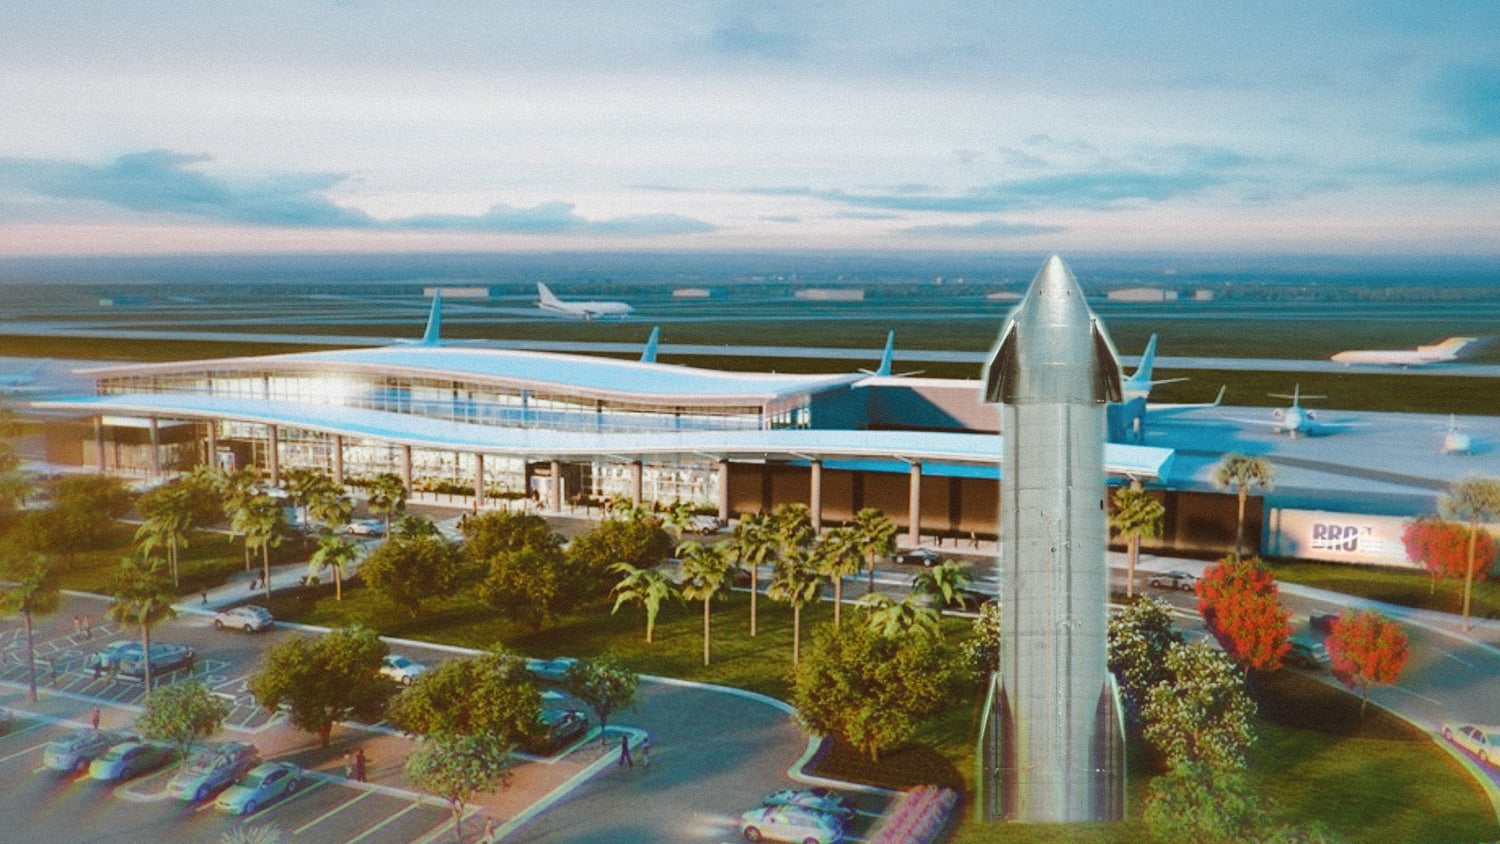 SpaceX will display a Starship at the Brownsville South Padre Island International Airport